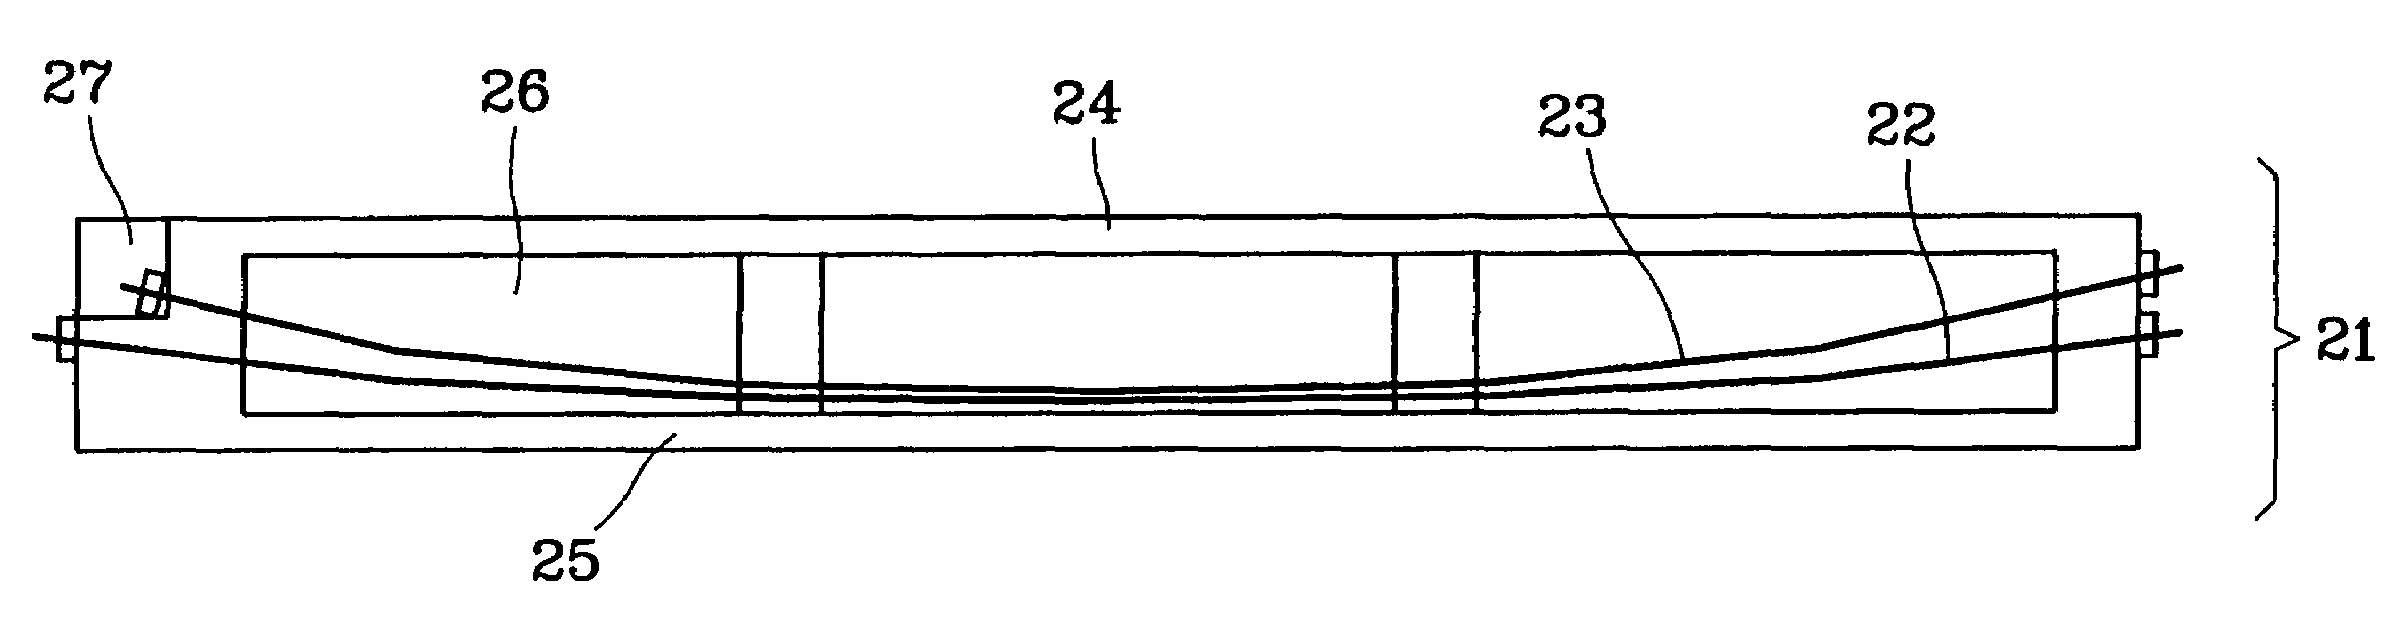 Method for designing and fabricating multi-step tension prestressed girder